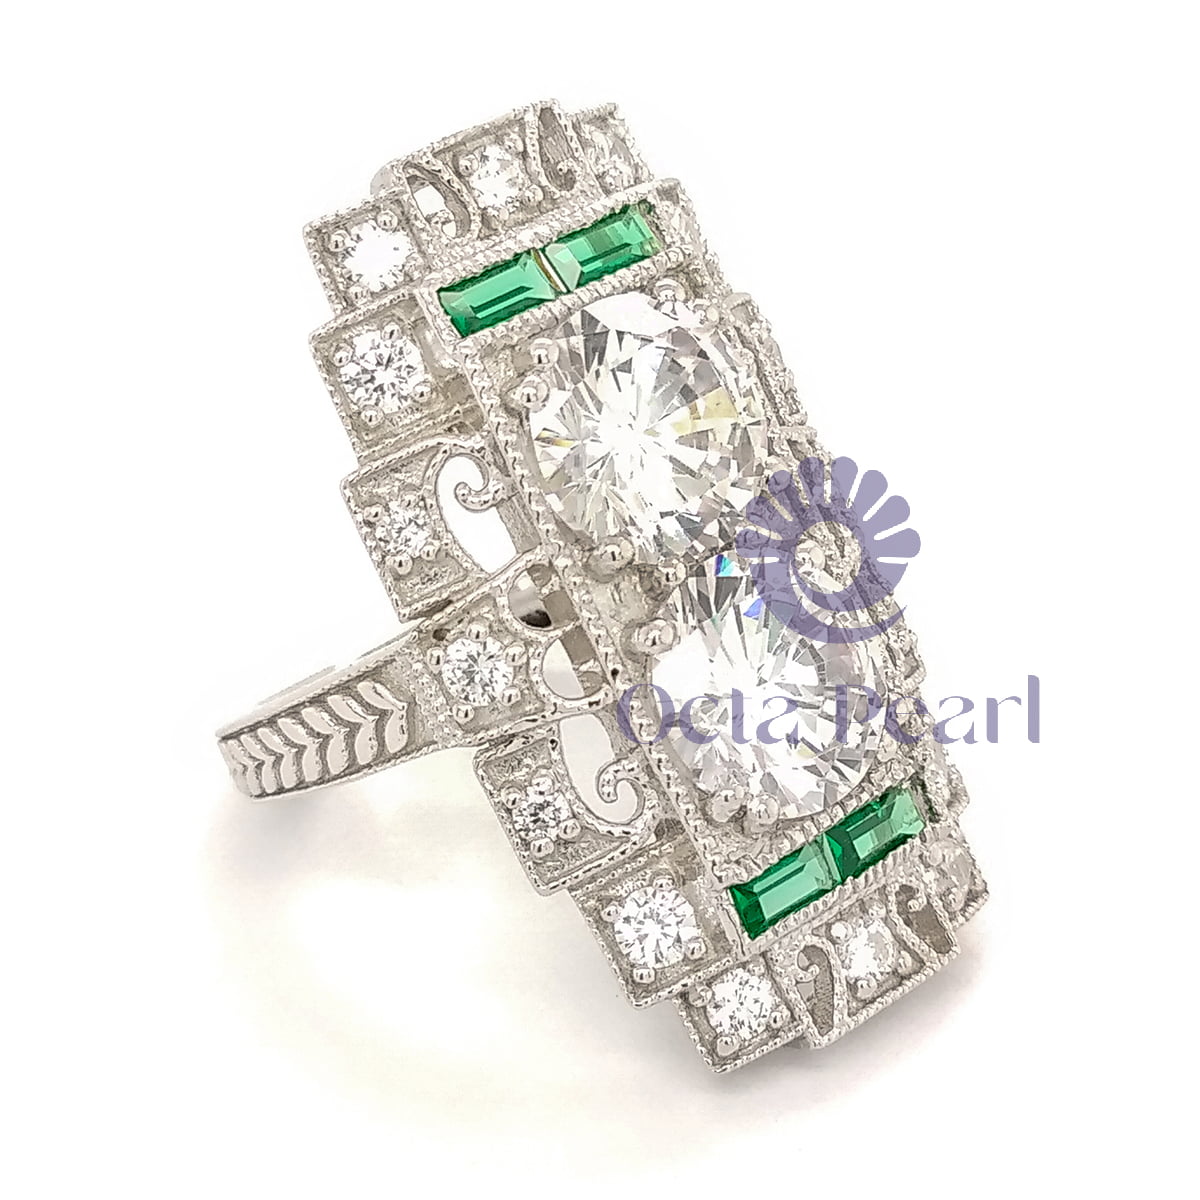 Round & Green Baguette Cut CZ Stone Art Deco Vintage Dinner Ring For Any Occasion (6 2/7 TCW)